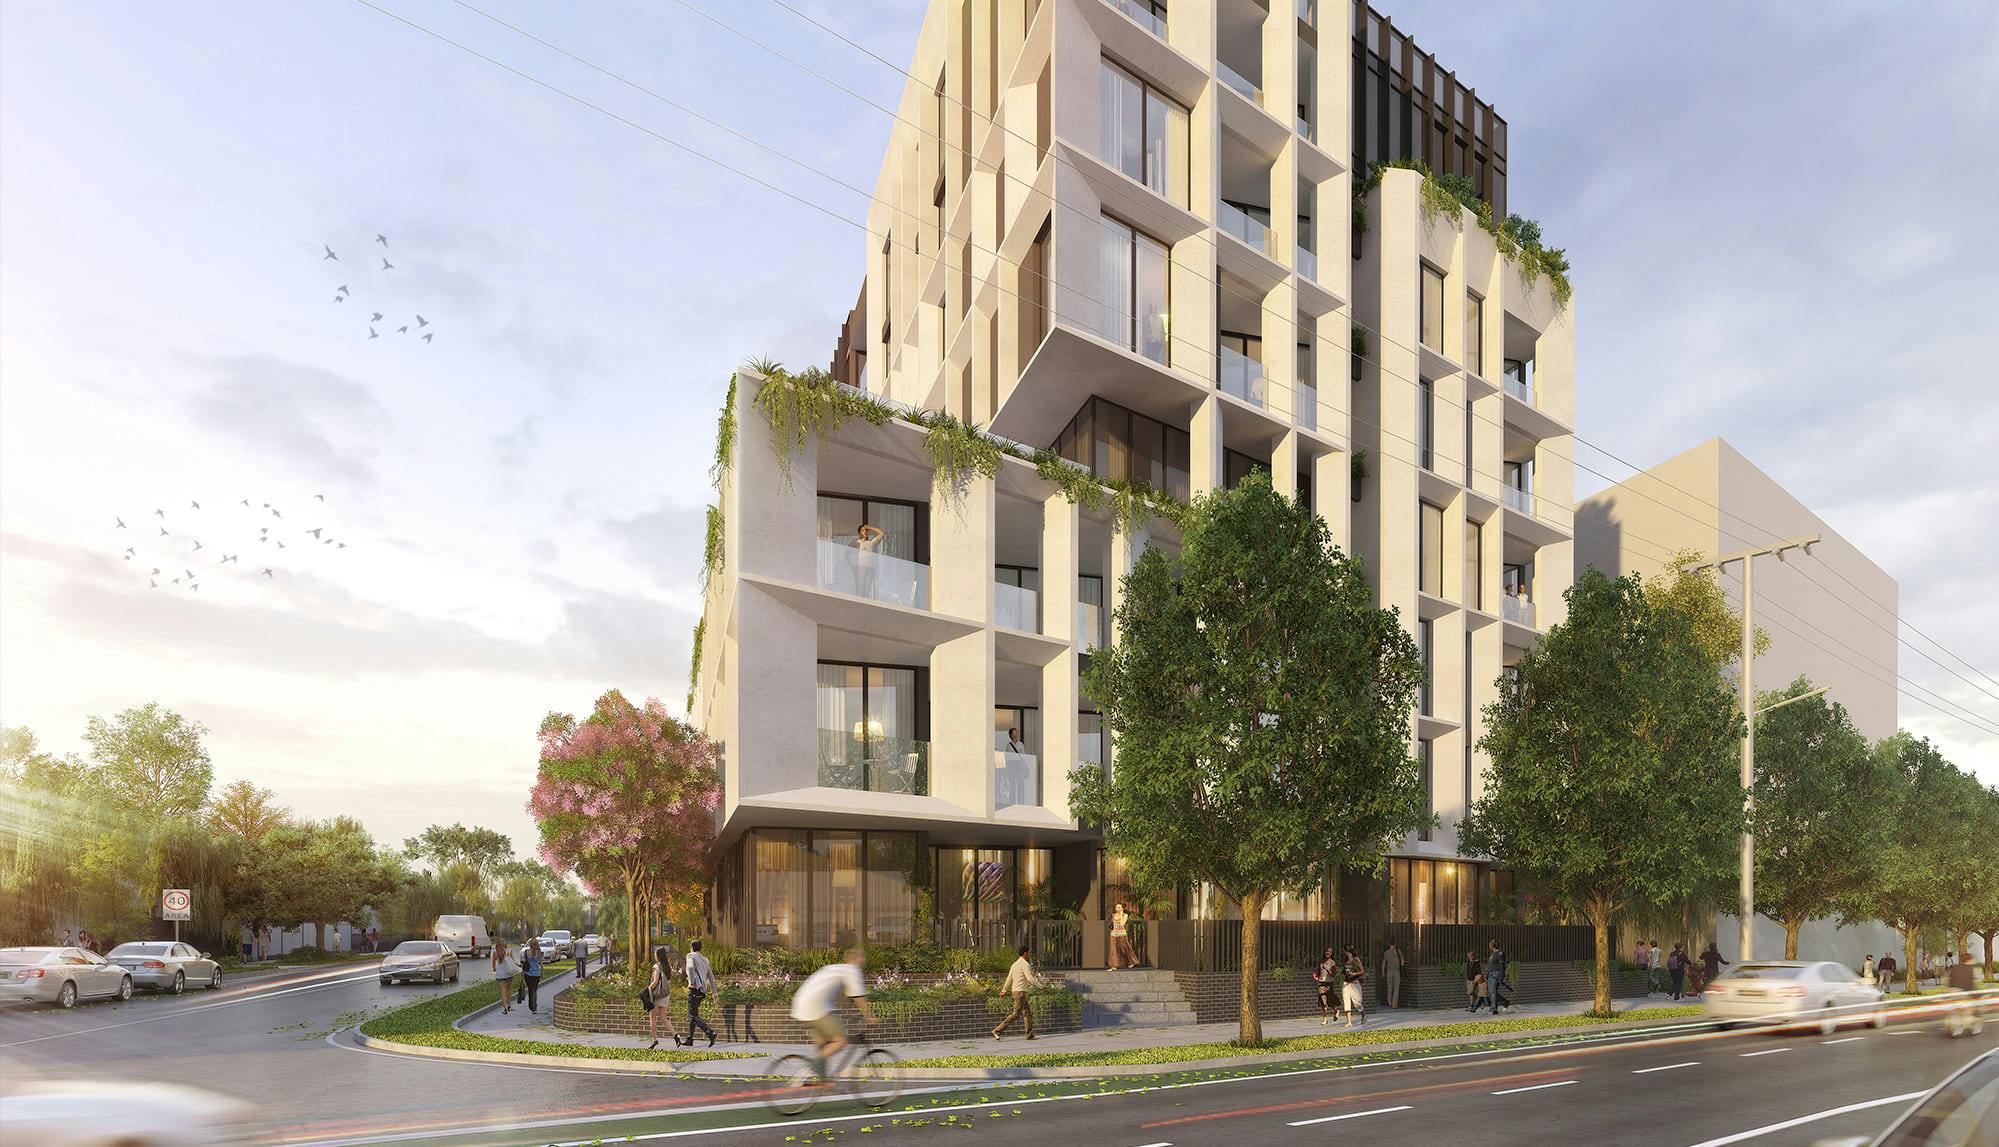 Parkview | YarraBend: Off the Plan Townhouses, Apartments & Property Melbourne